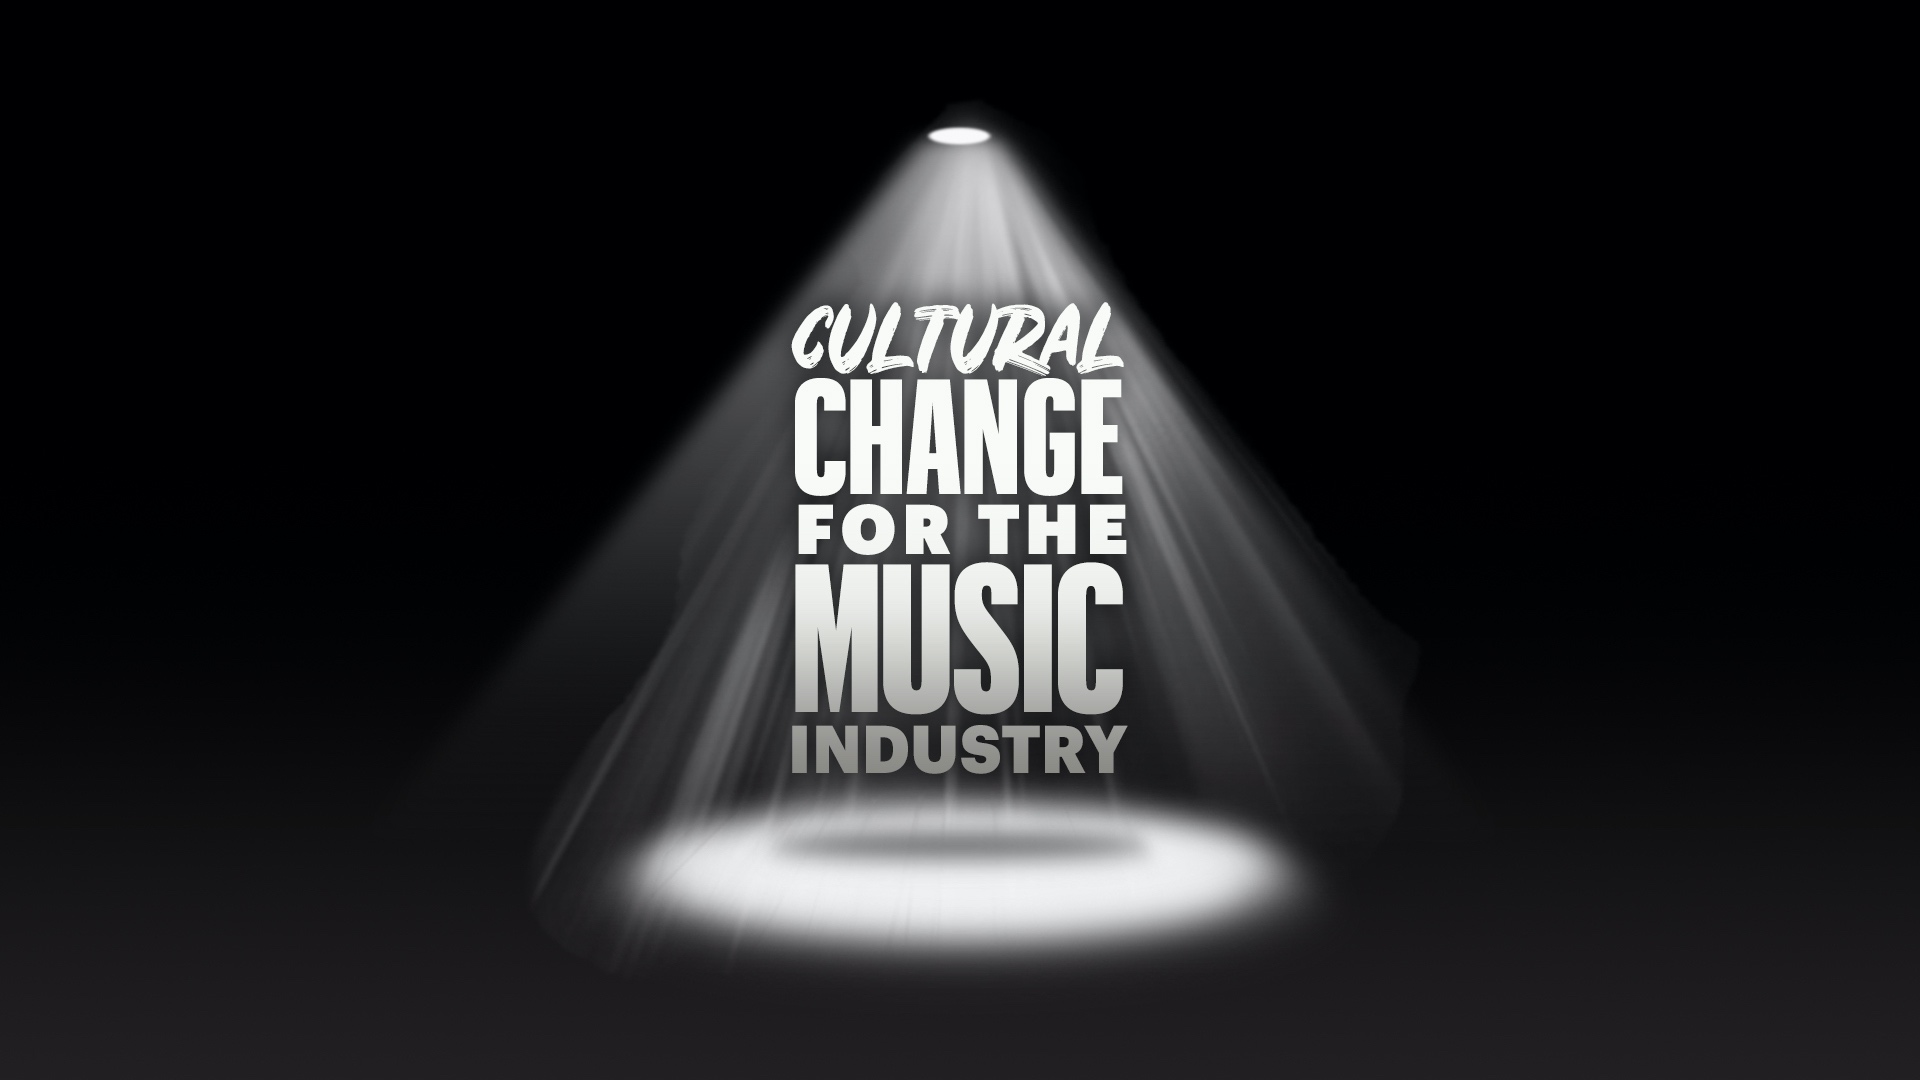 Putting the spotlight on cultural change in the music industry